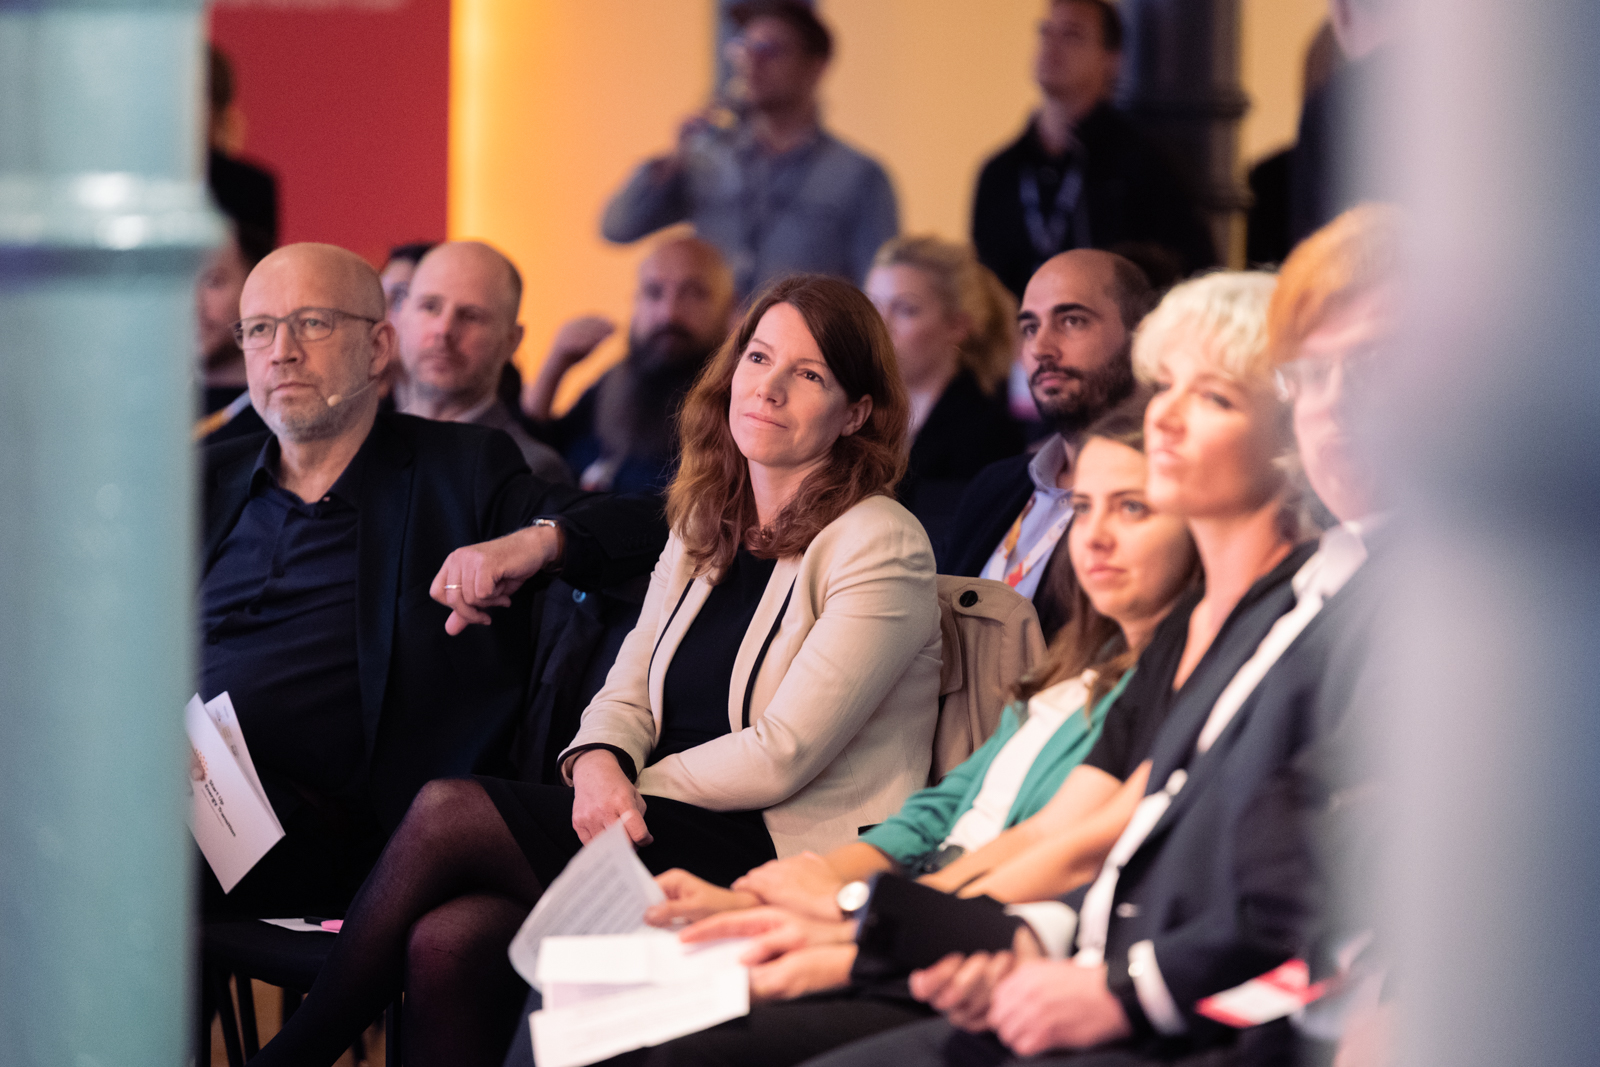 Audience at the SET Award Ceremony 2022. Andreas Kuhlmann sitting next to Dr. Anna Christmann, member of the Bundestag.